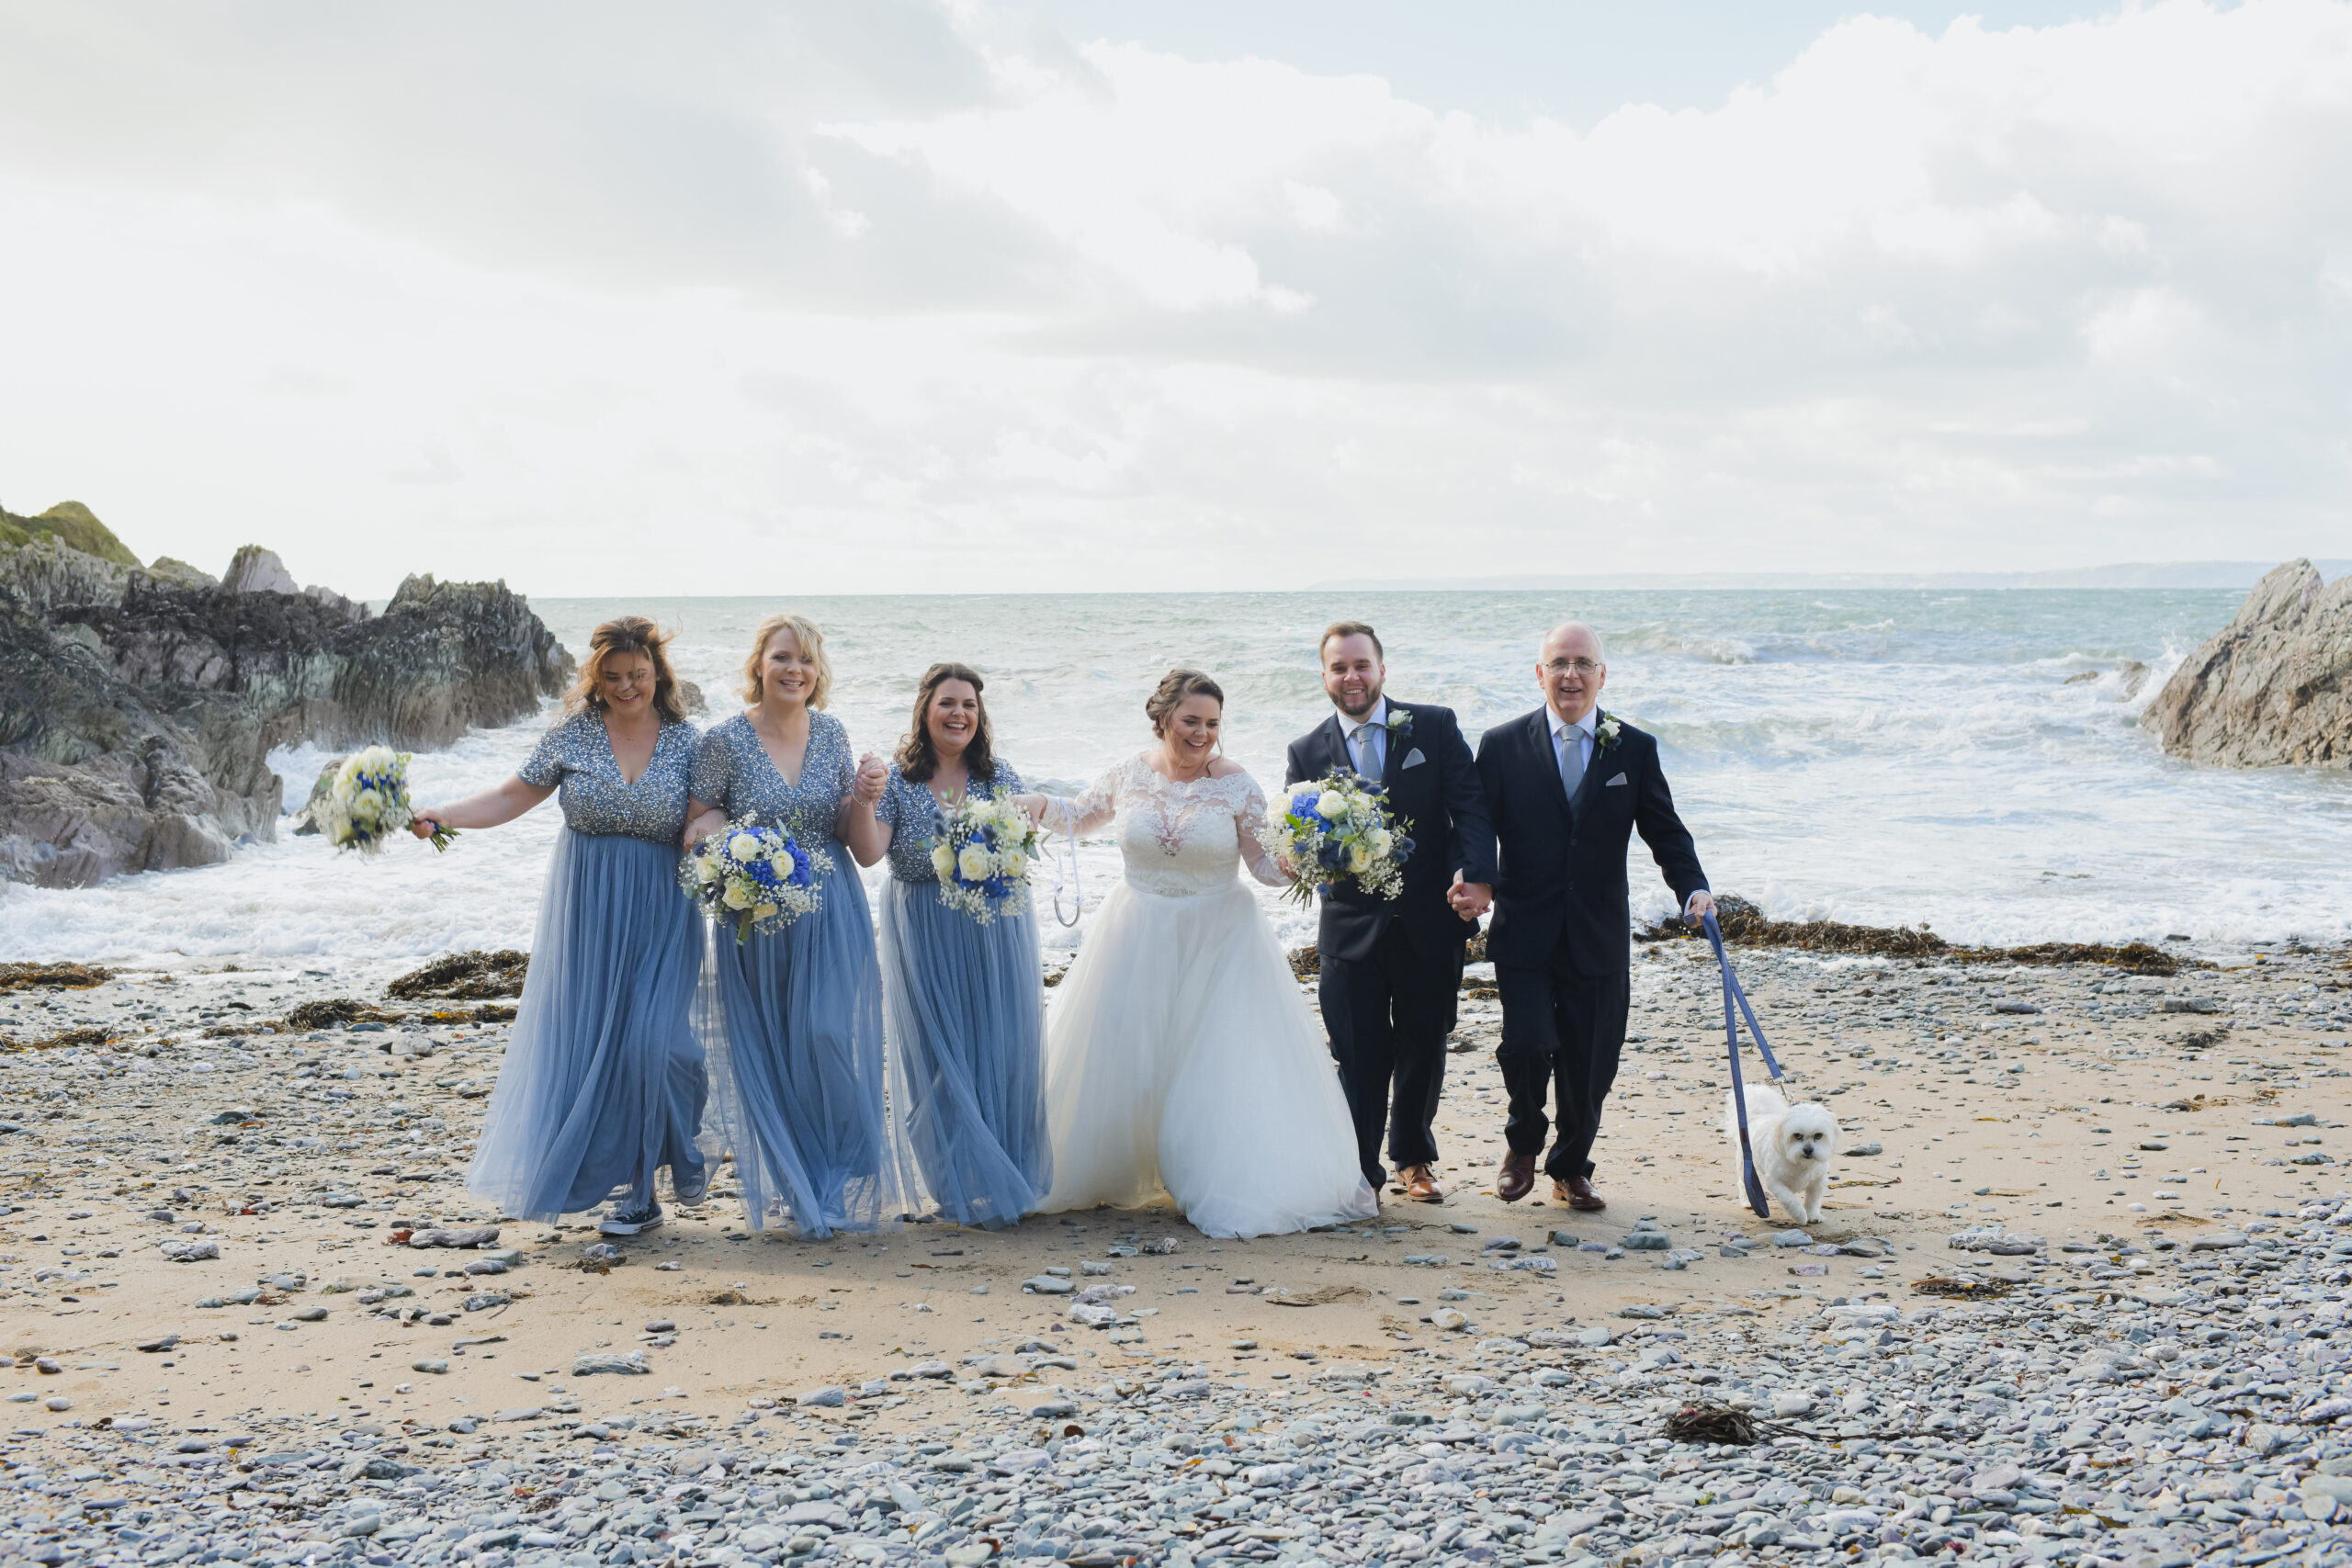 Wedding Photography on the Beach at Polhawn Fort with the Bridal Party